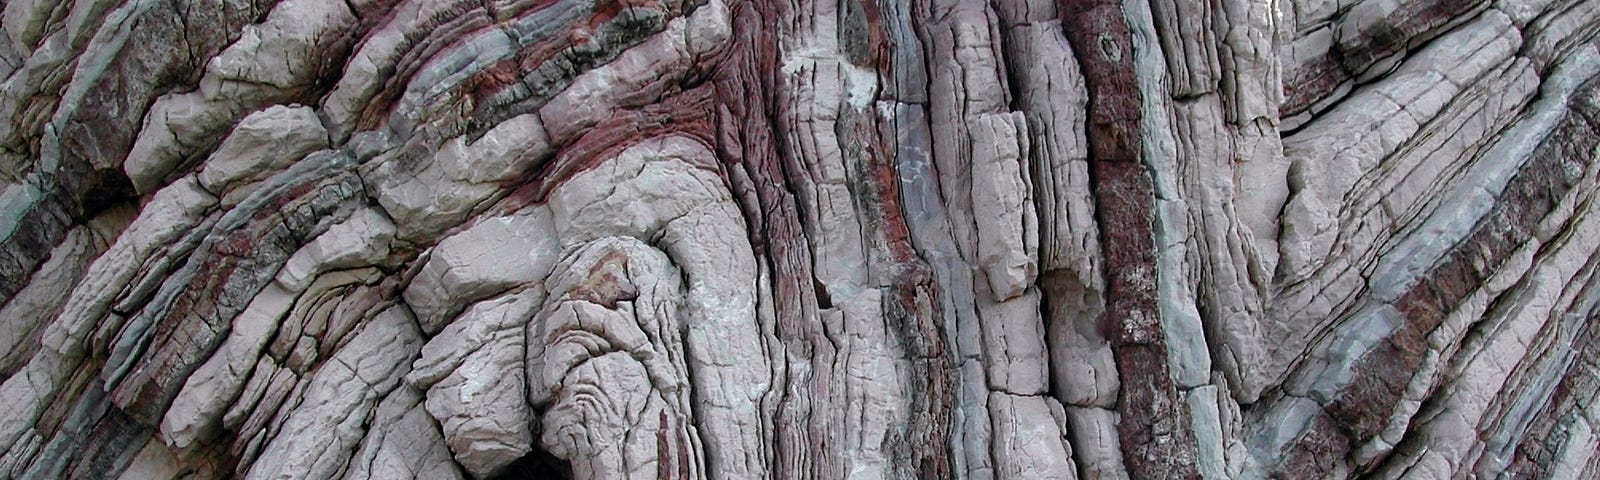 layers of rocks that have been folded by pressure over millenia.